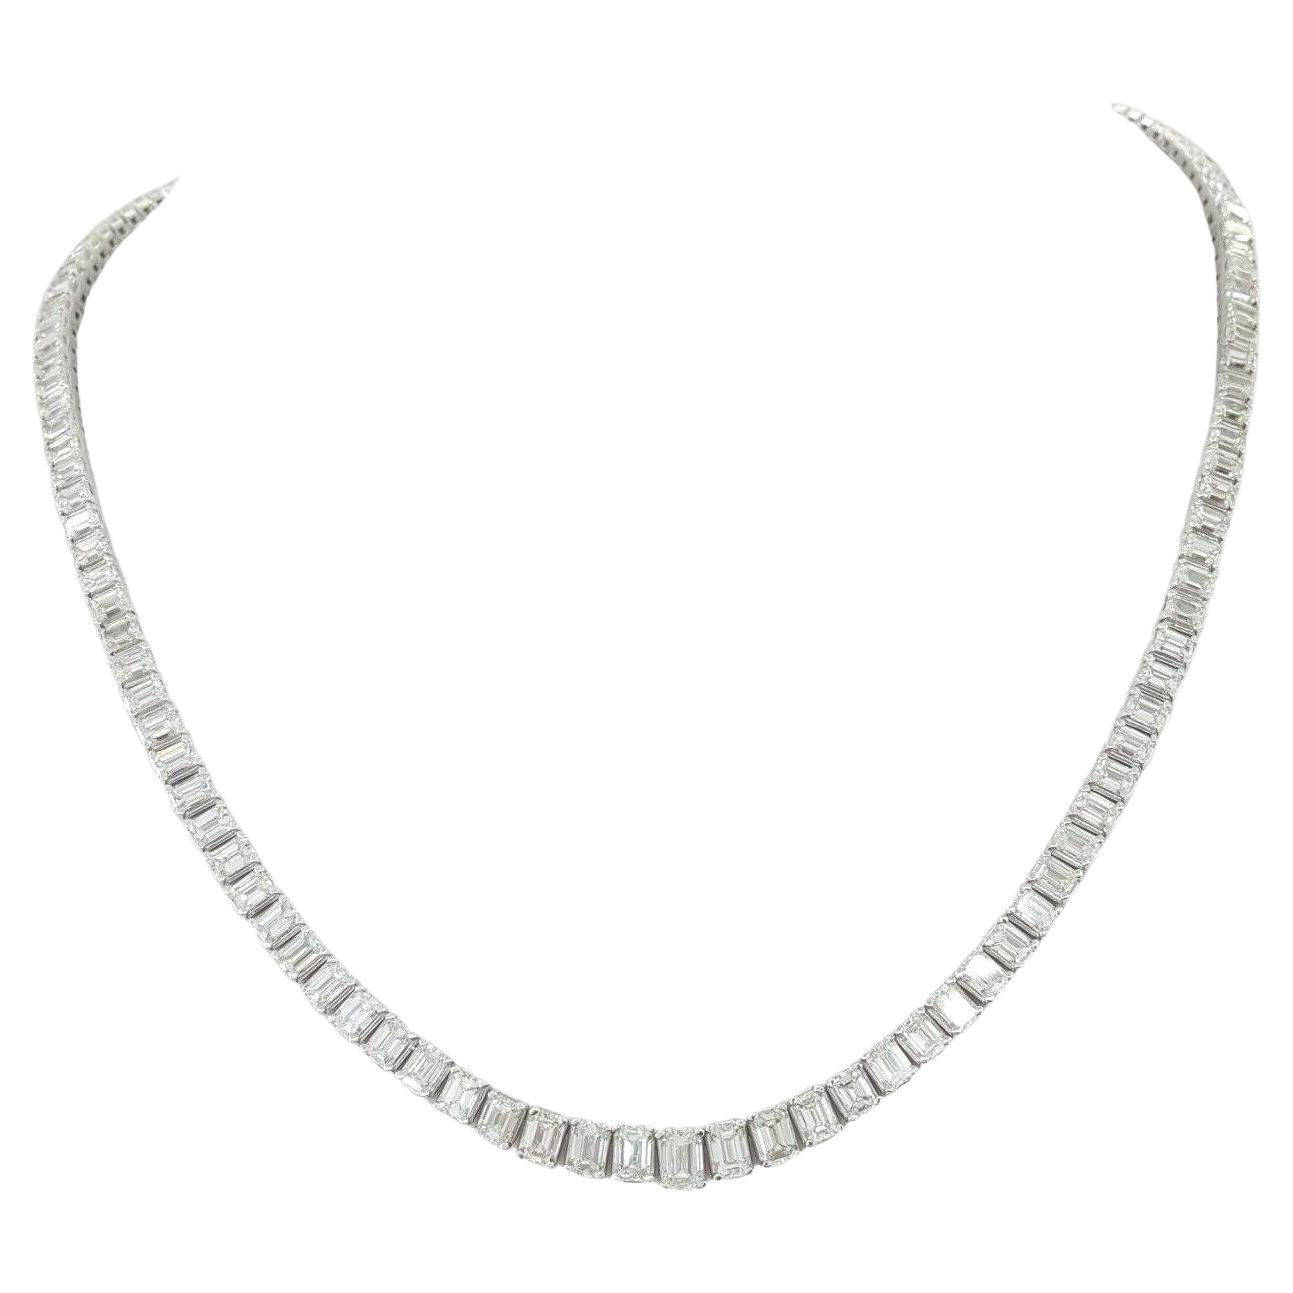 24 Carat Tennis Necklace in 18 Carats White Gold with Basket Prong Set For Sale